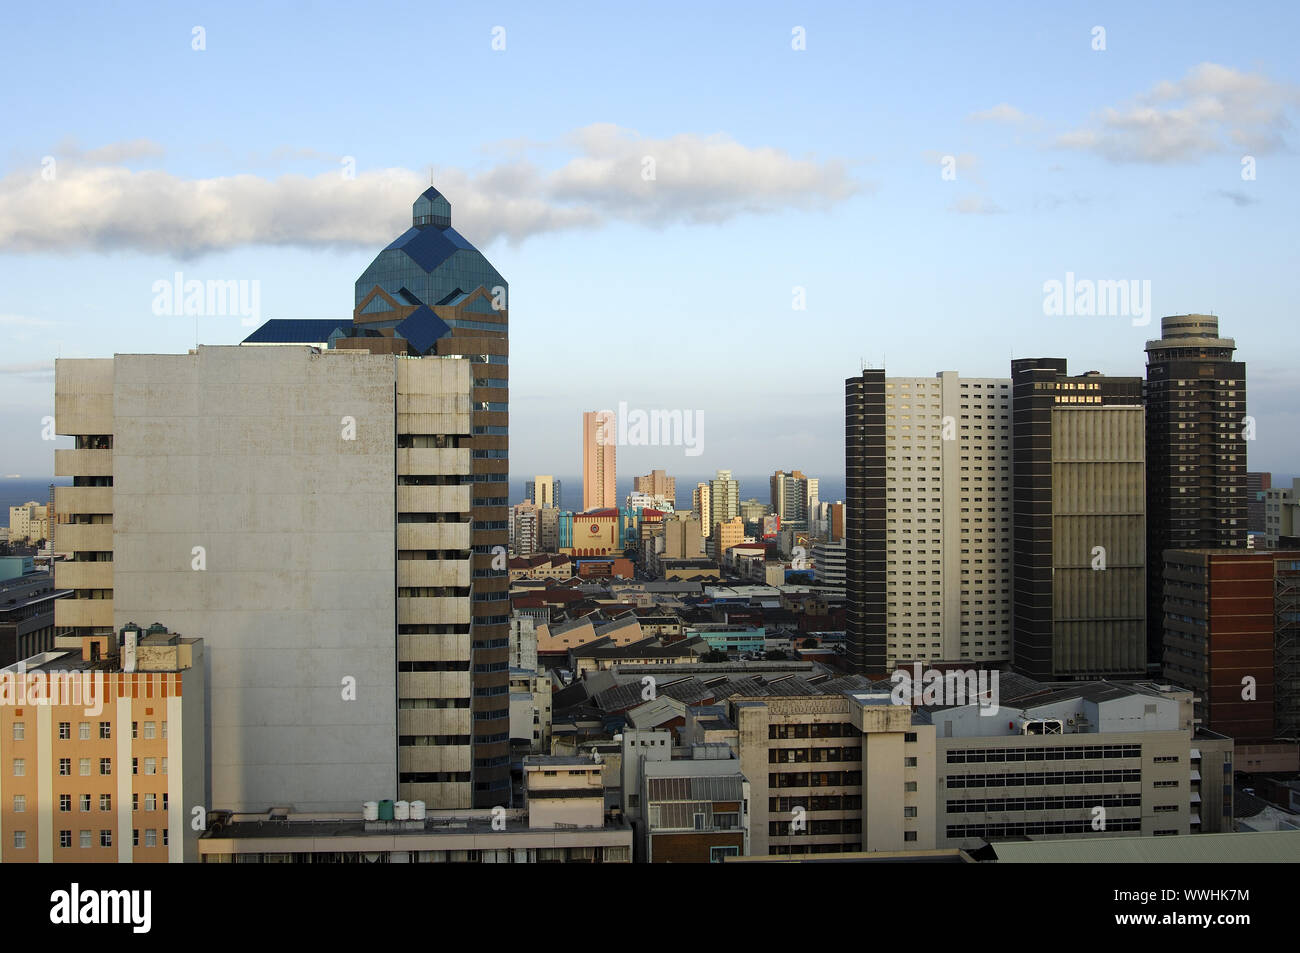 Evening light in the city centre of Durban, South Africa Stock Photo